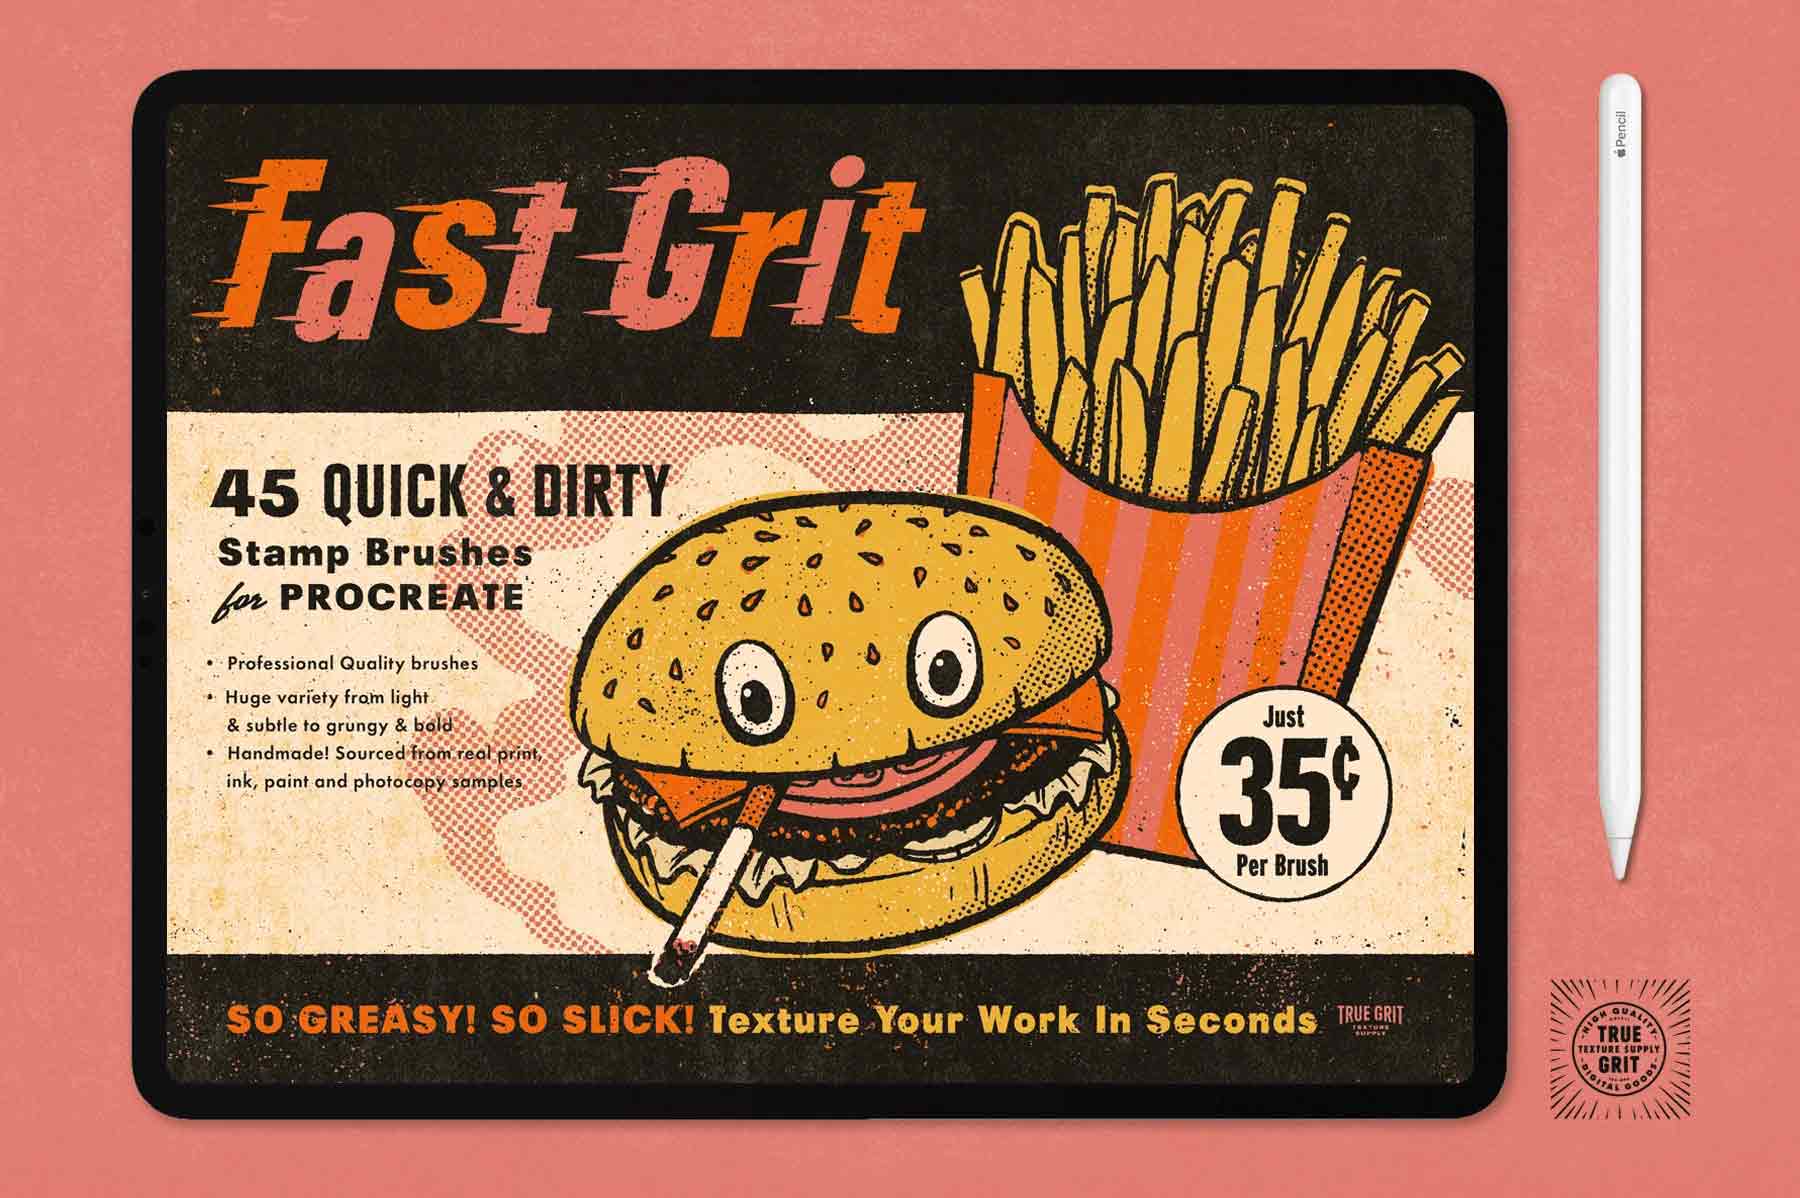 Fast Grit quick and dirty stamp brushes for Procreate from True Grit Texture Supply.